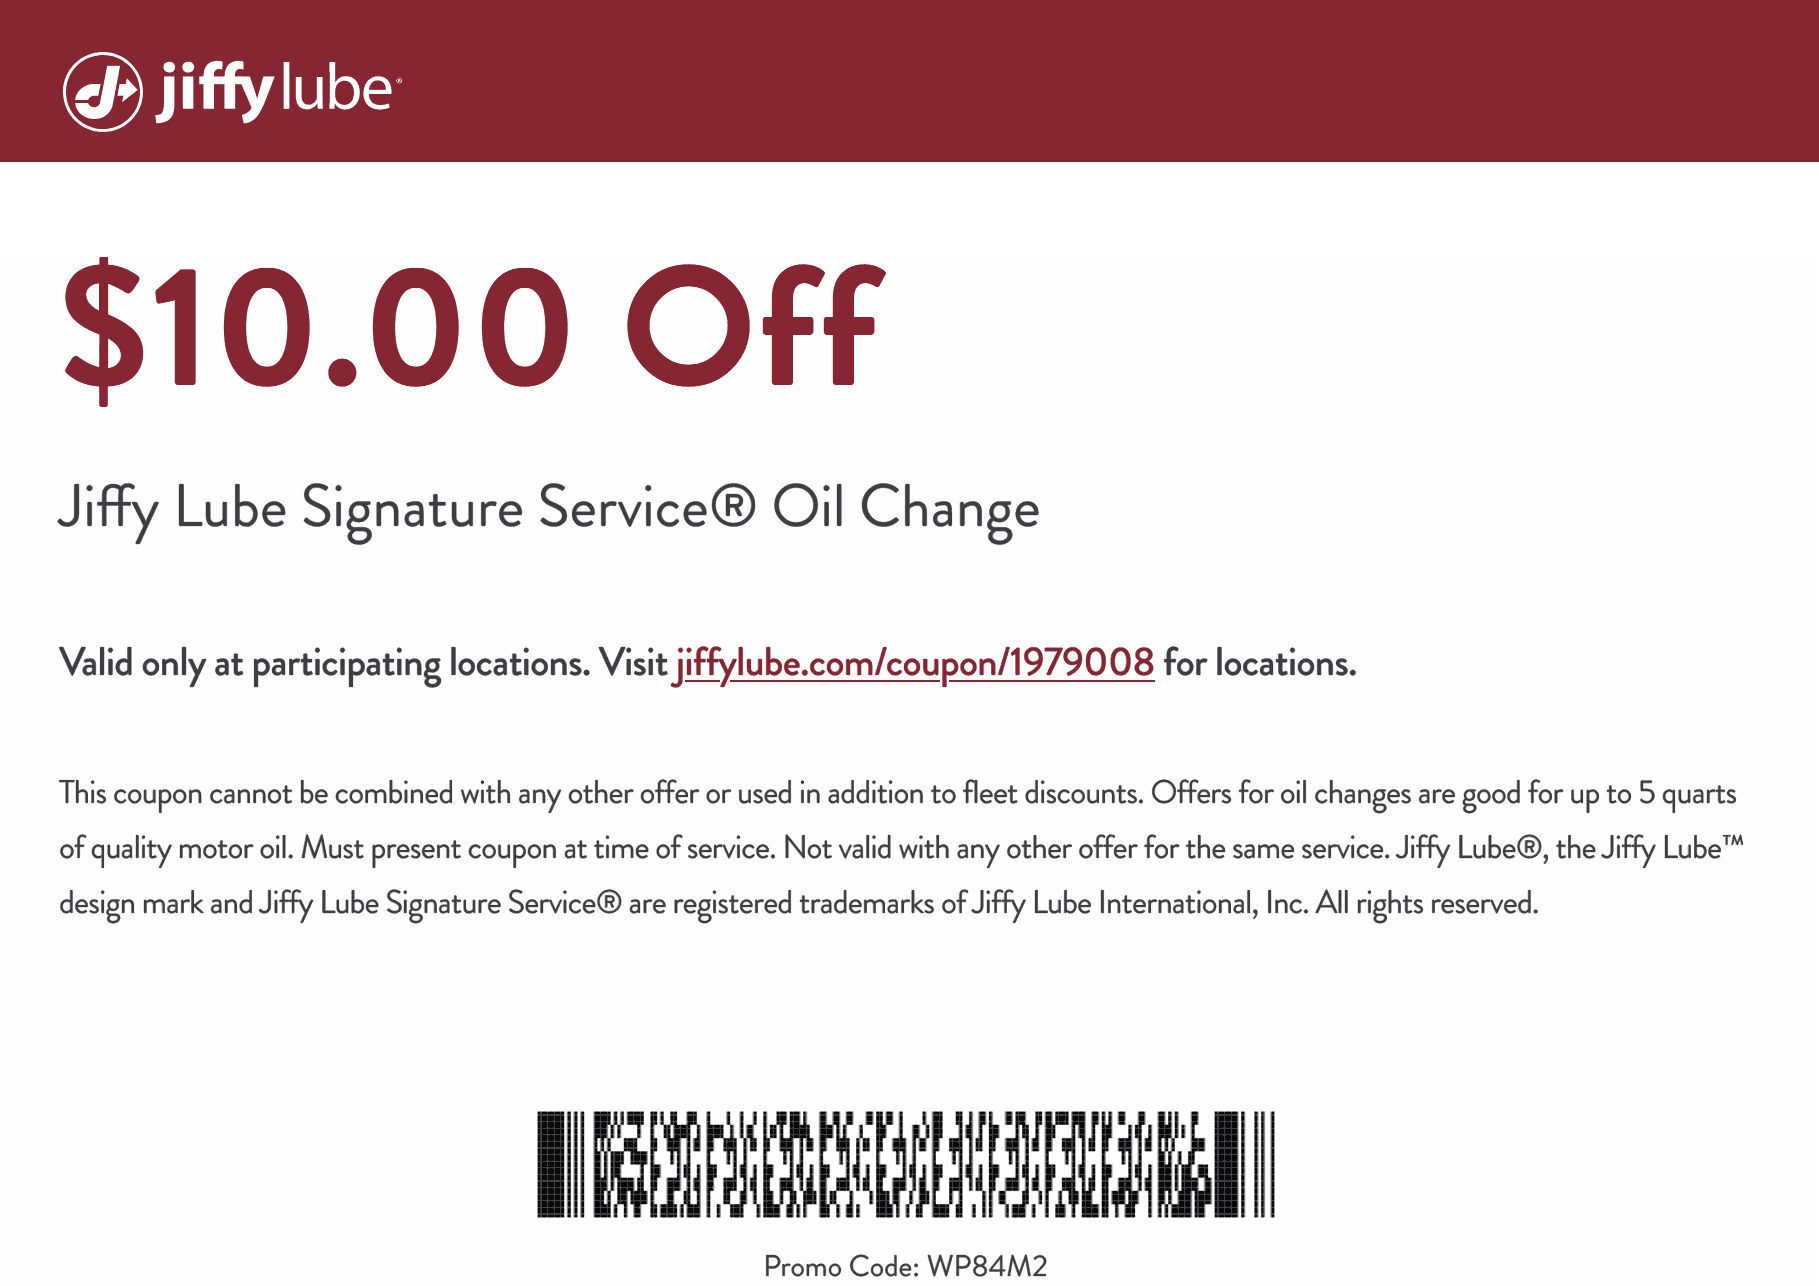 Jiffy Lube stores Coupon  $10 off a signature oil change at Jiffy Lube #jiffylube 